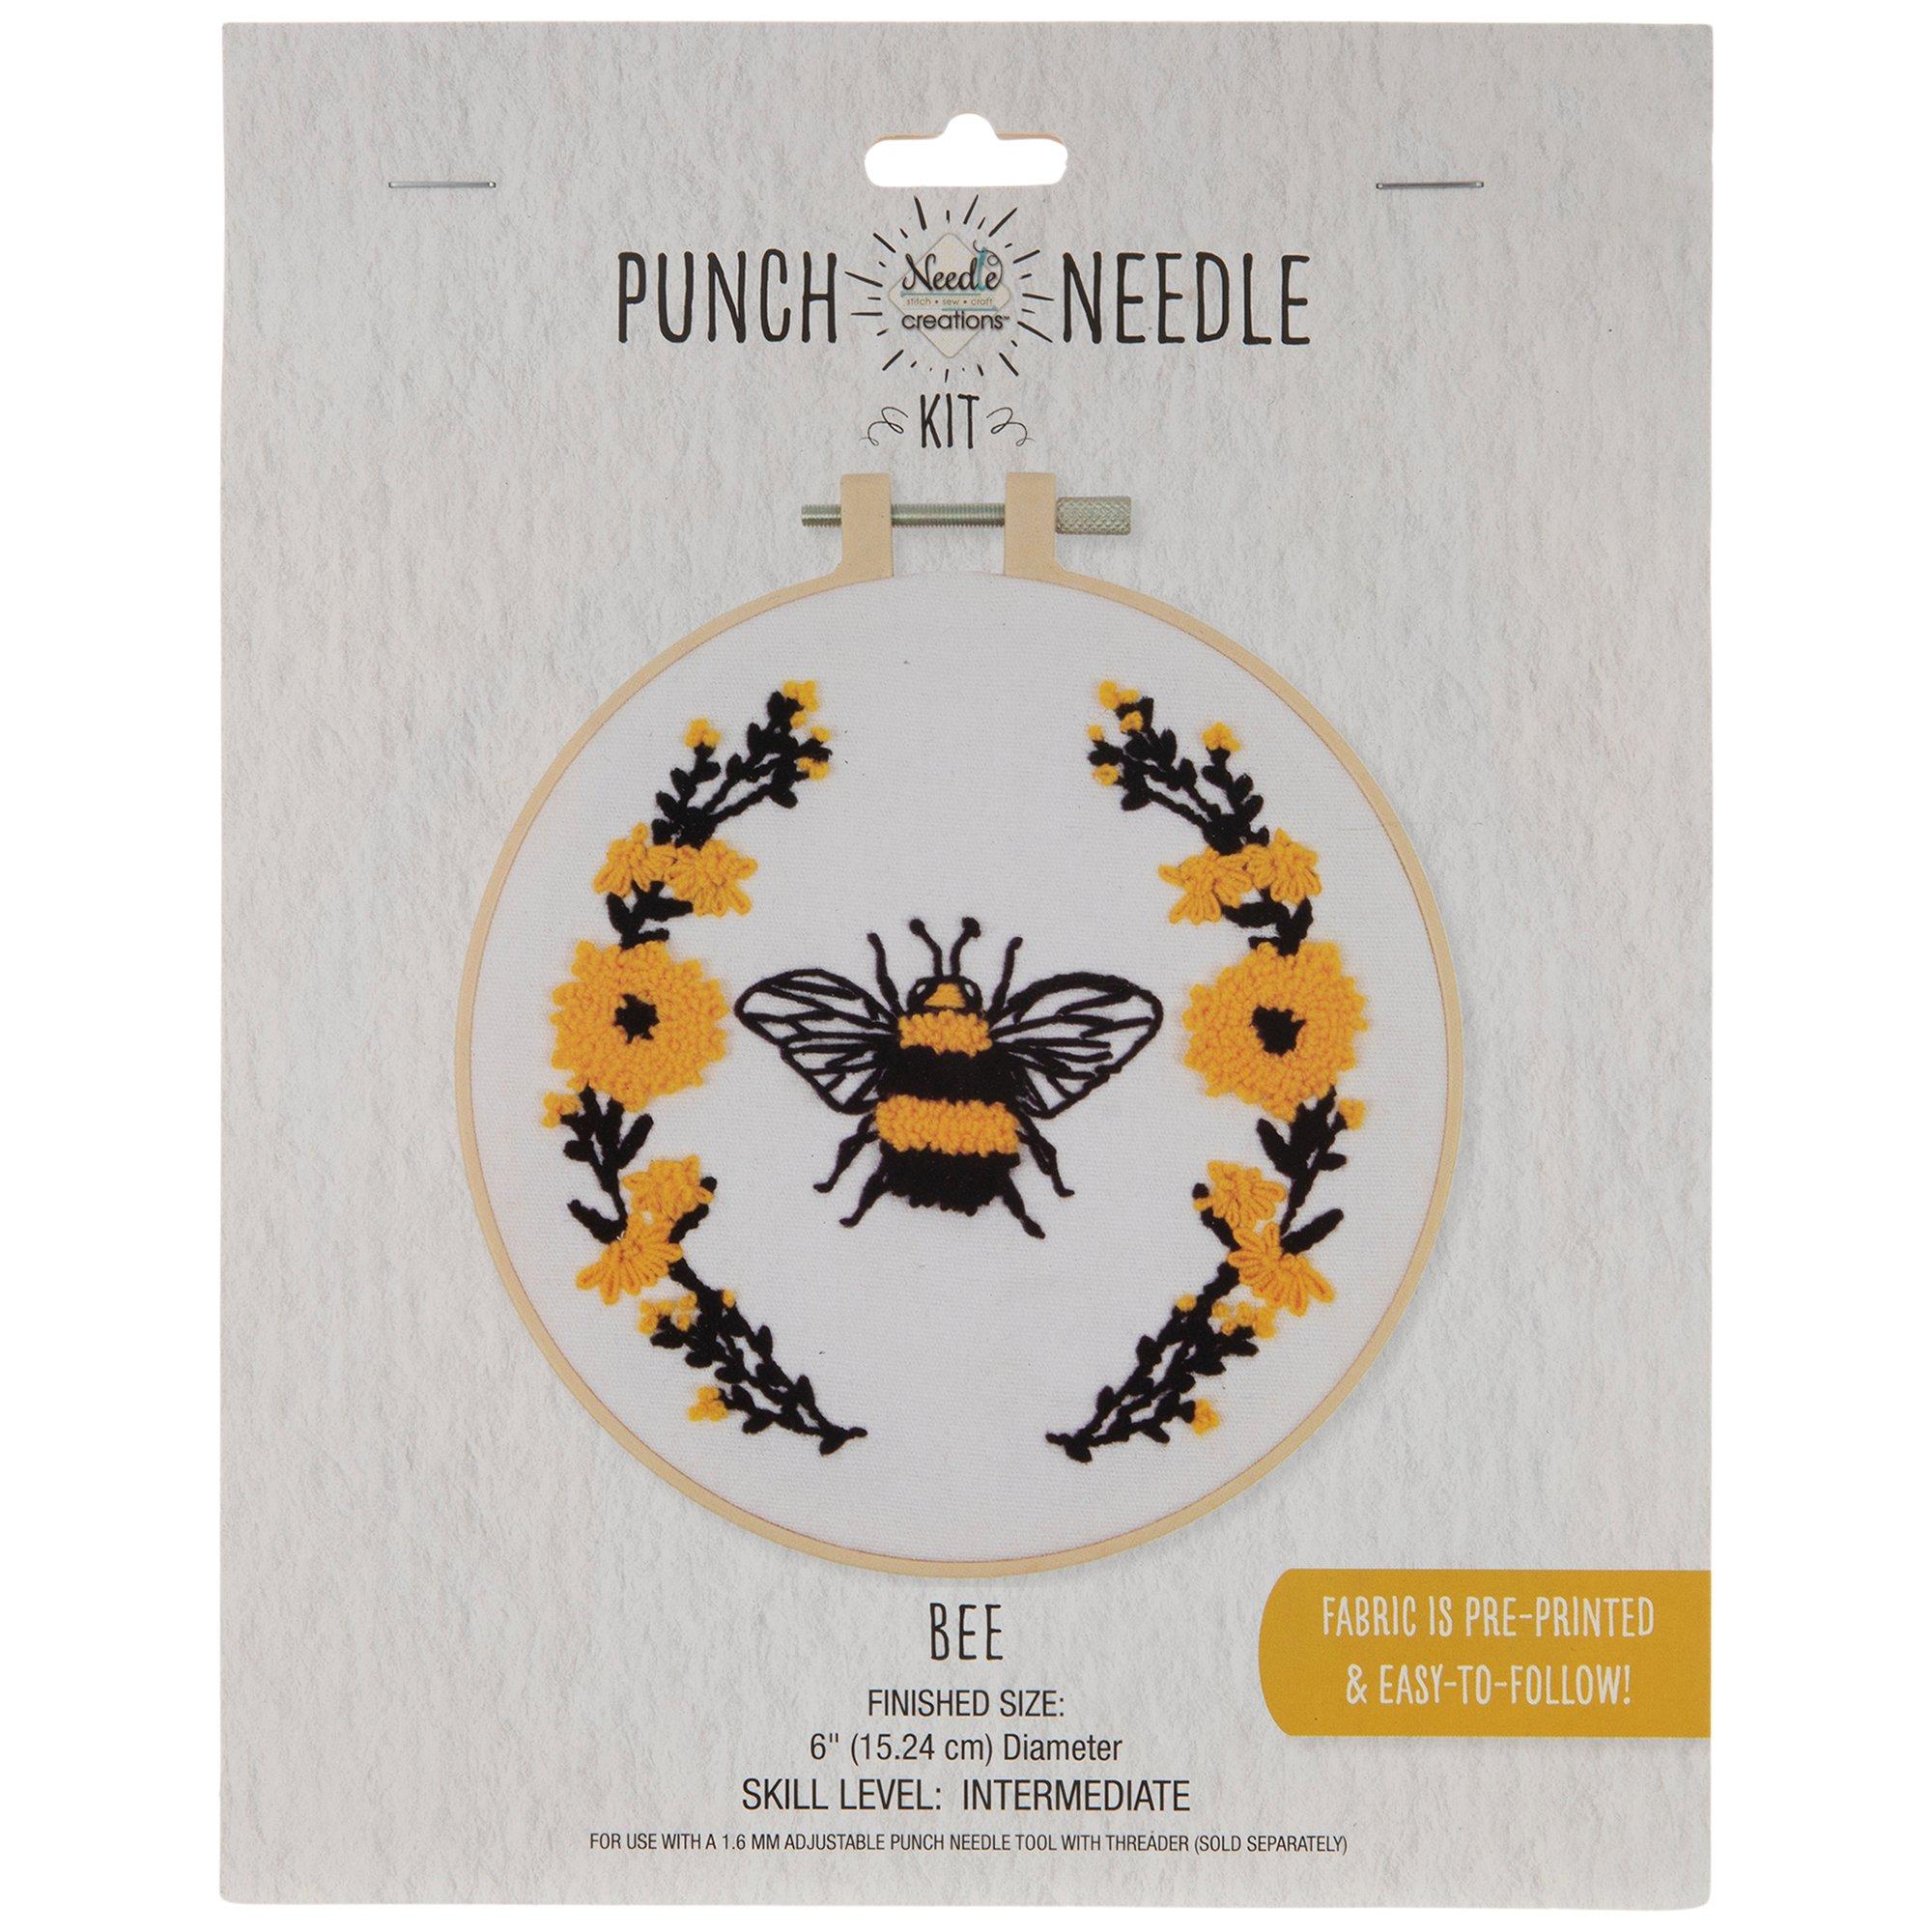 Dimensions Punch Needle Tool for Easy Punch Embroidery Kits at Weekend Kits